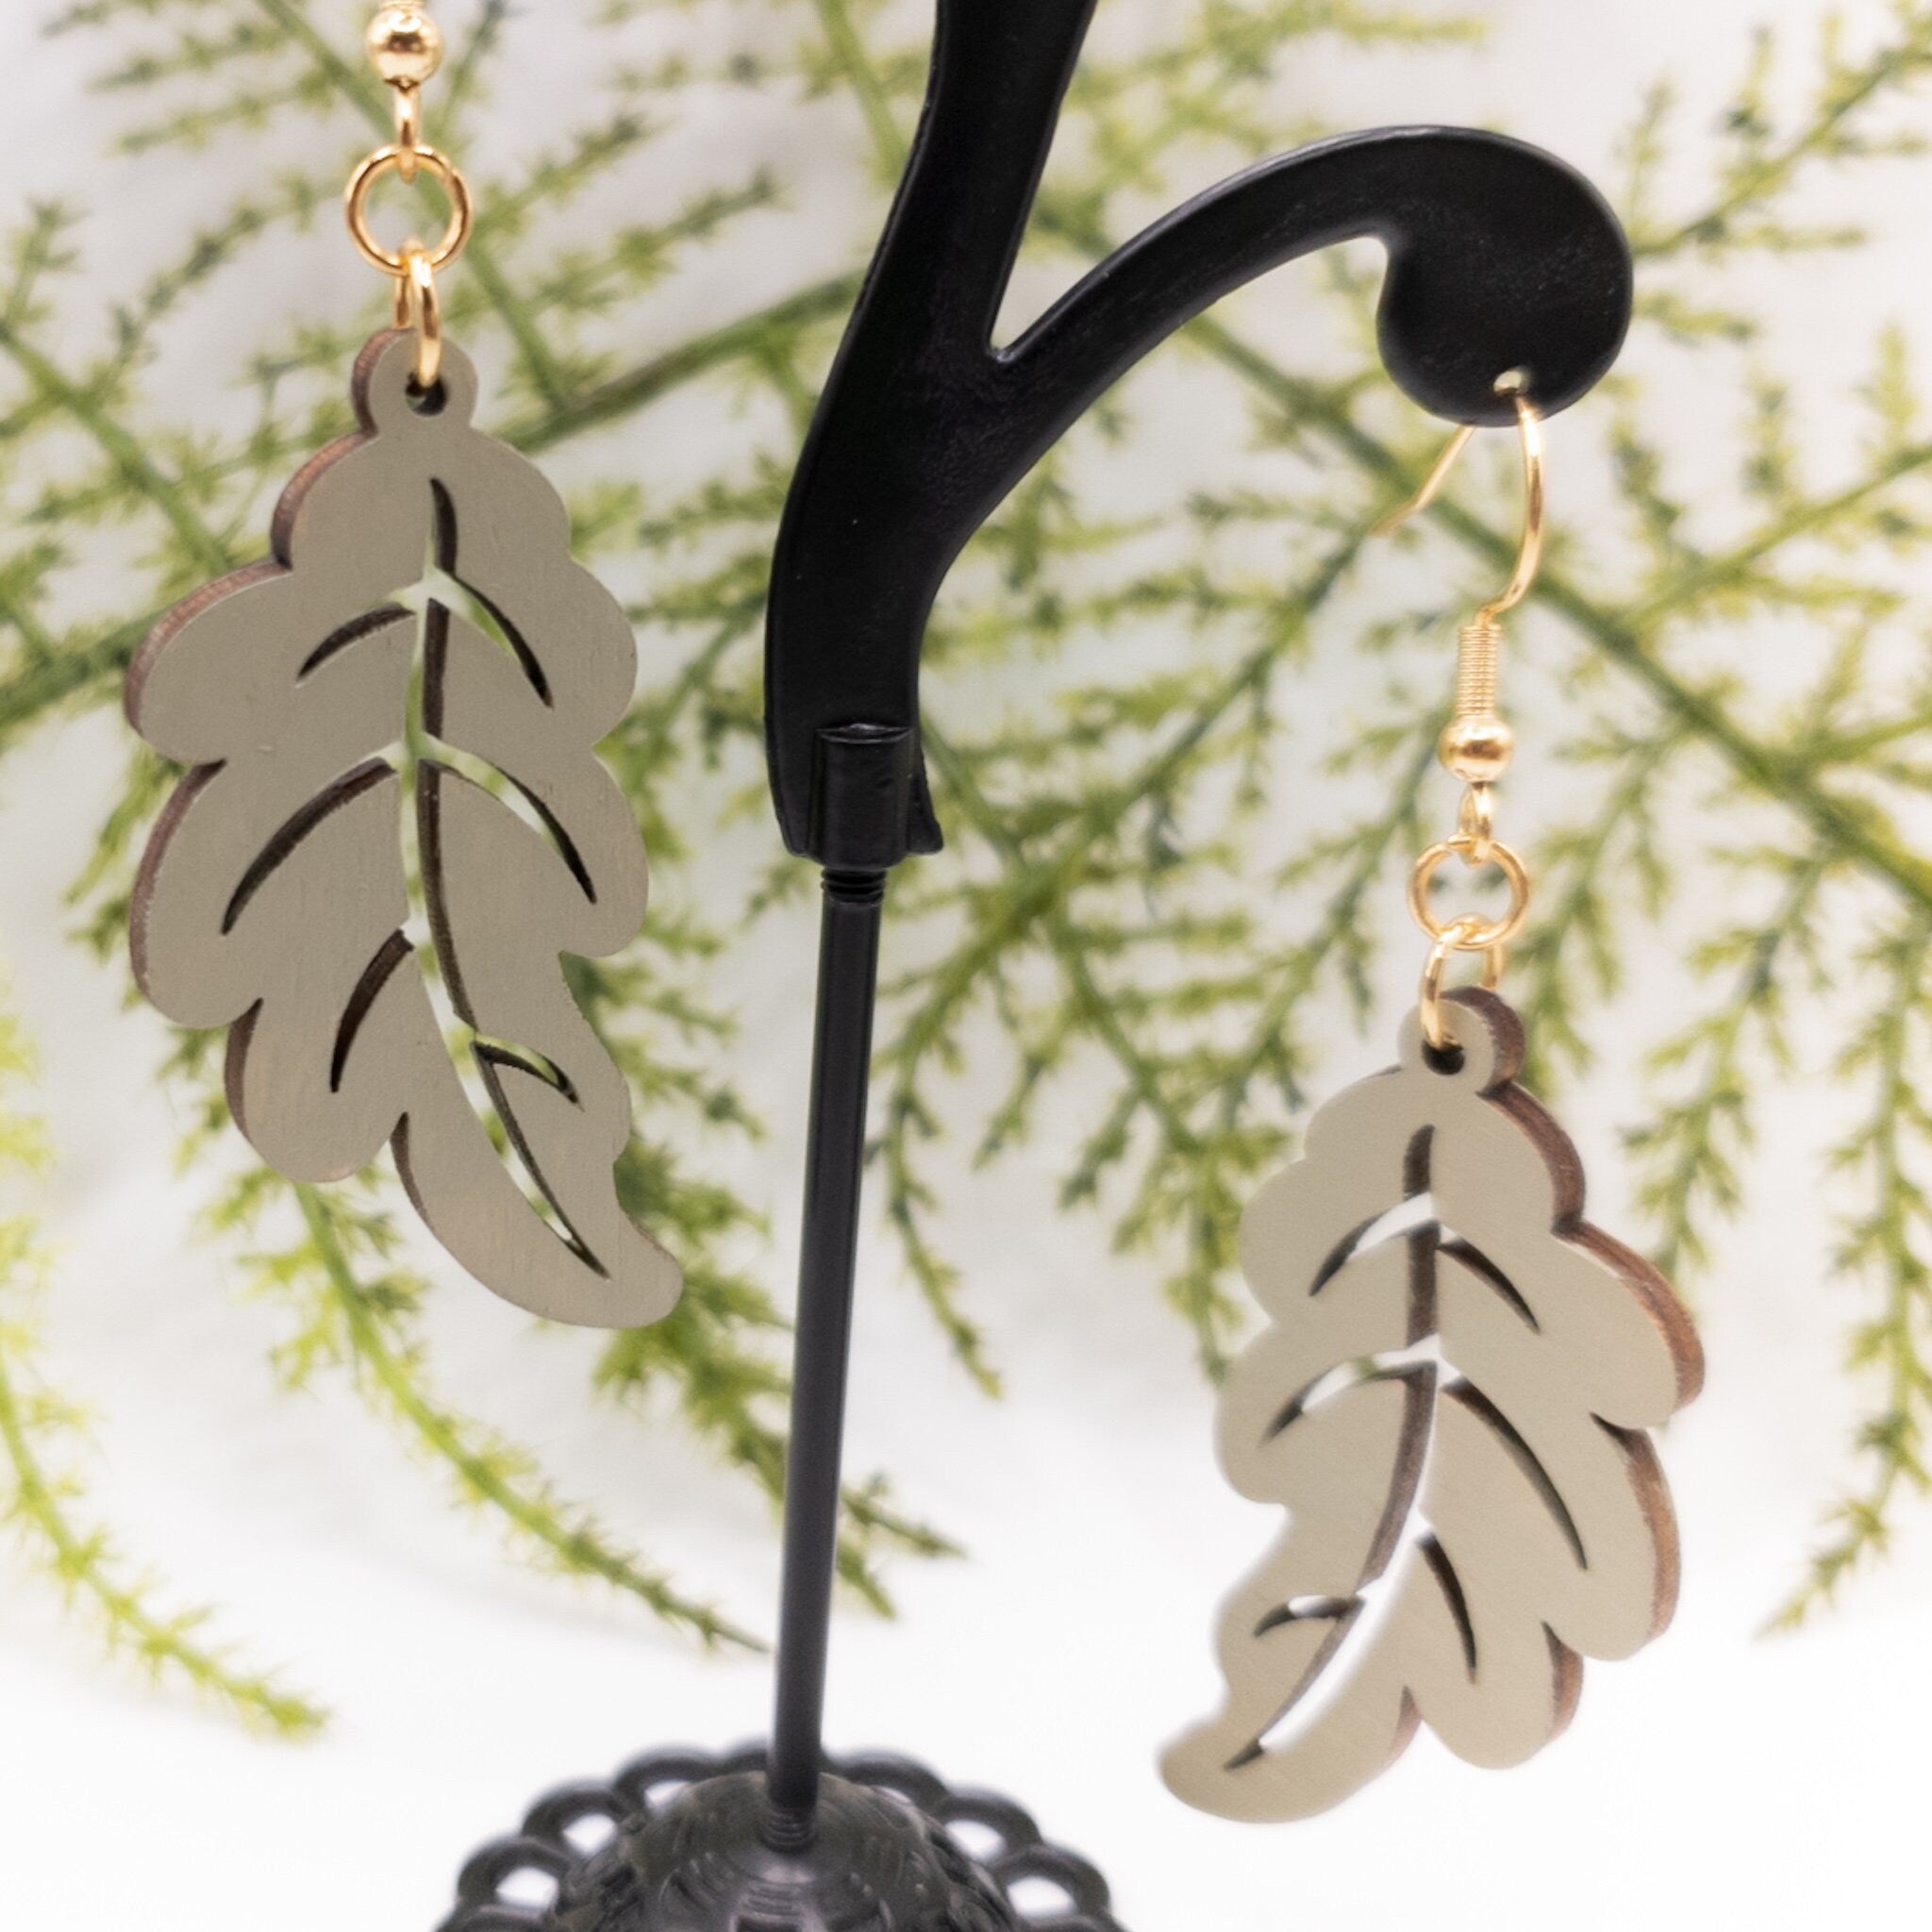 Wooden Leaf Earrings with Stainless Steel Fish Hooks Laser Cut Wood Drop Dangle Earrings for The Nature Lover in Stonewedge Green Silver Hardware